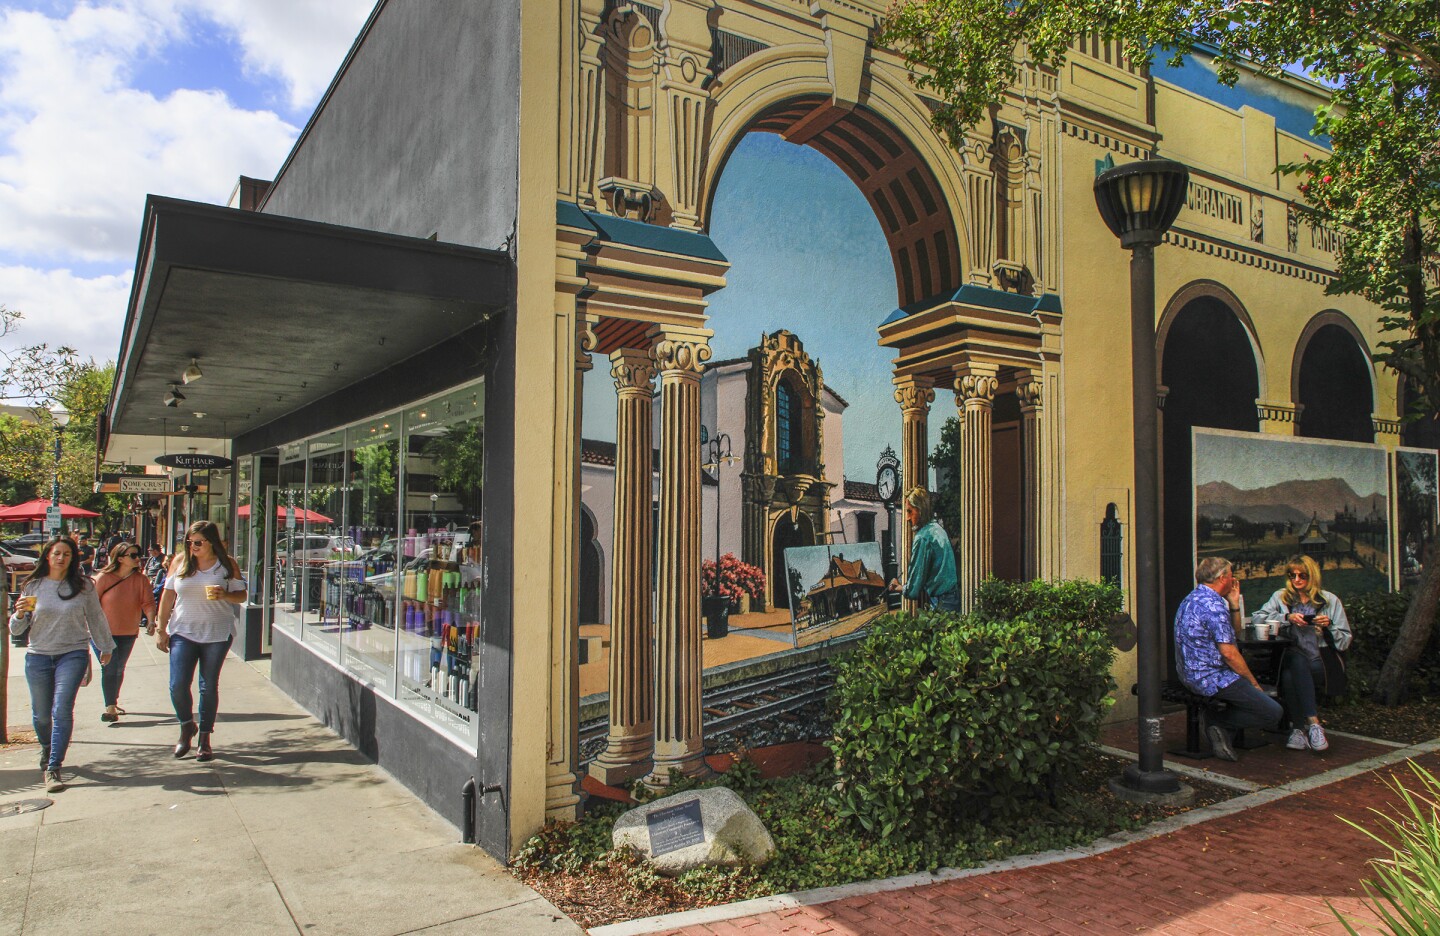 CLAREMONT, CA., SEPTEMBER 29, 2019: Artist Art Mortimer created a giant mural of historic street scenes in Claremont Village on the wall of the paseo at 123 Yale in the city of Claremont, located 30-miles east of Los Angeles at the base of the San Gabriel Mountains. The unique collection of old, restored buildings house record stores, antique shops, cafes and a bakery September 29, 2019 (Mark Boster For the LA Times).